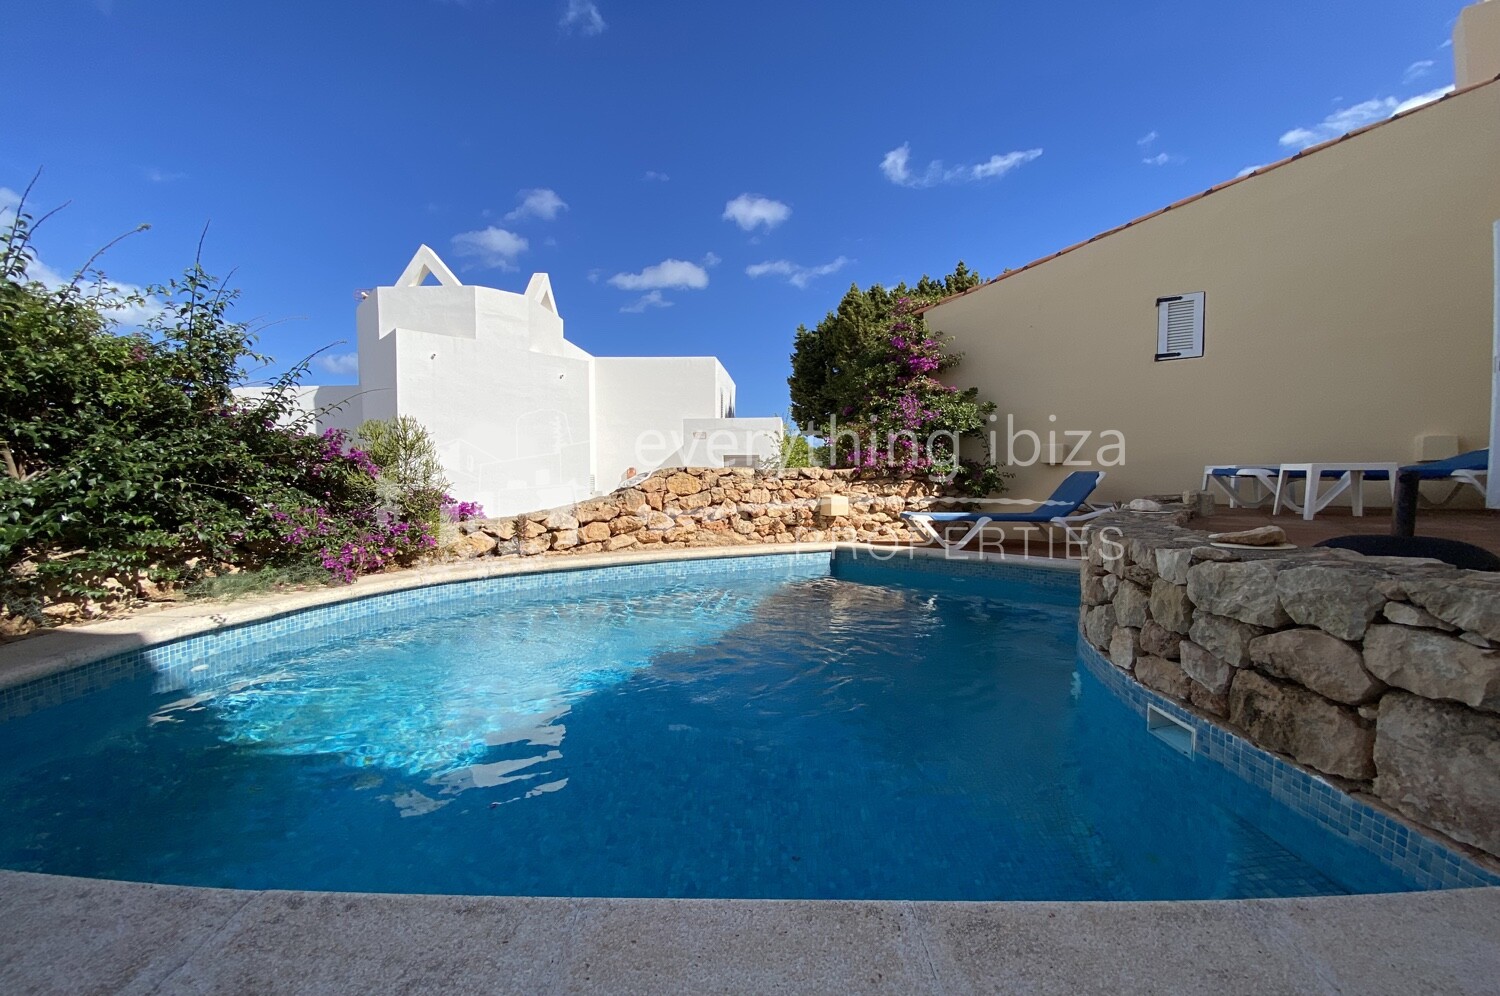 Charming Mediterranean Style Villa Composed of 3 Houses into 1, ref. 1487, for sale in Ibiza by everything ibiza Properties